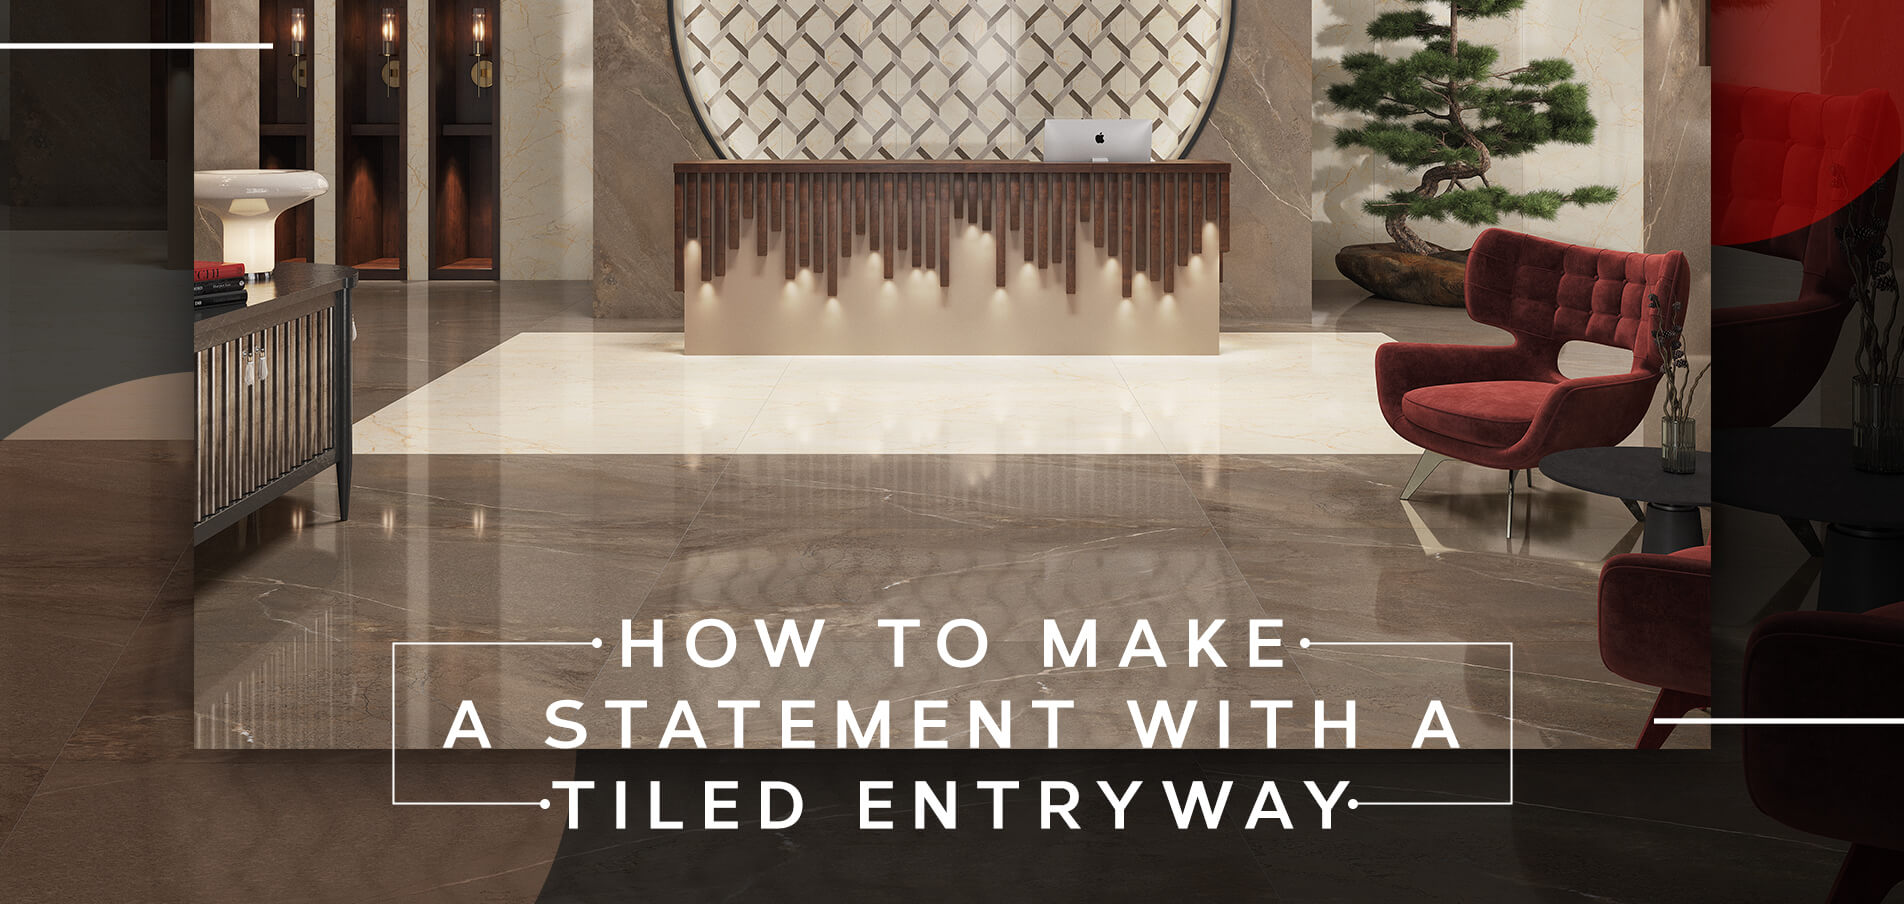 How to make a statement with a tiled entryway